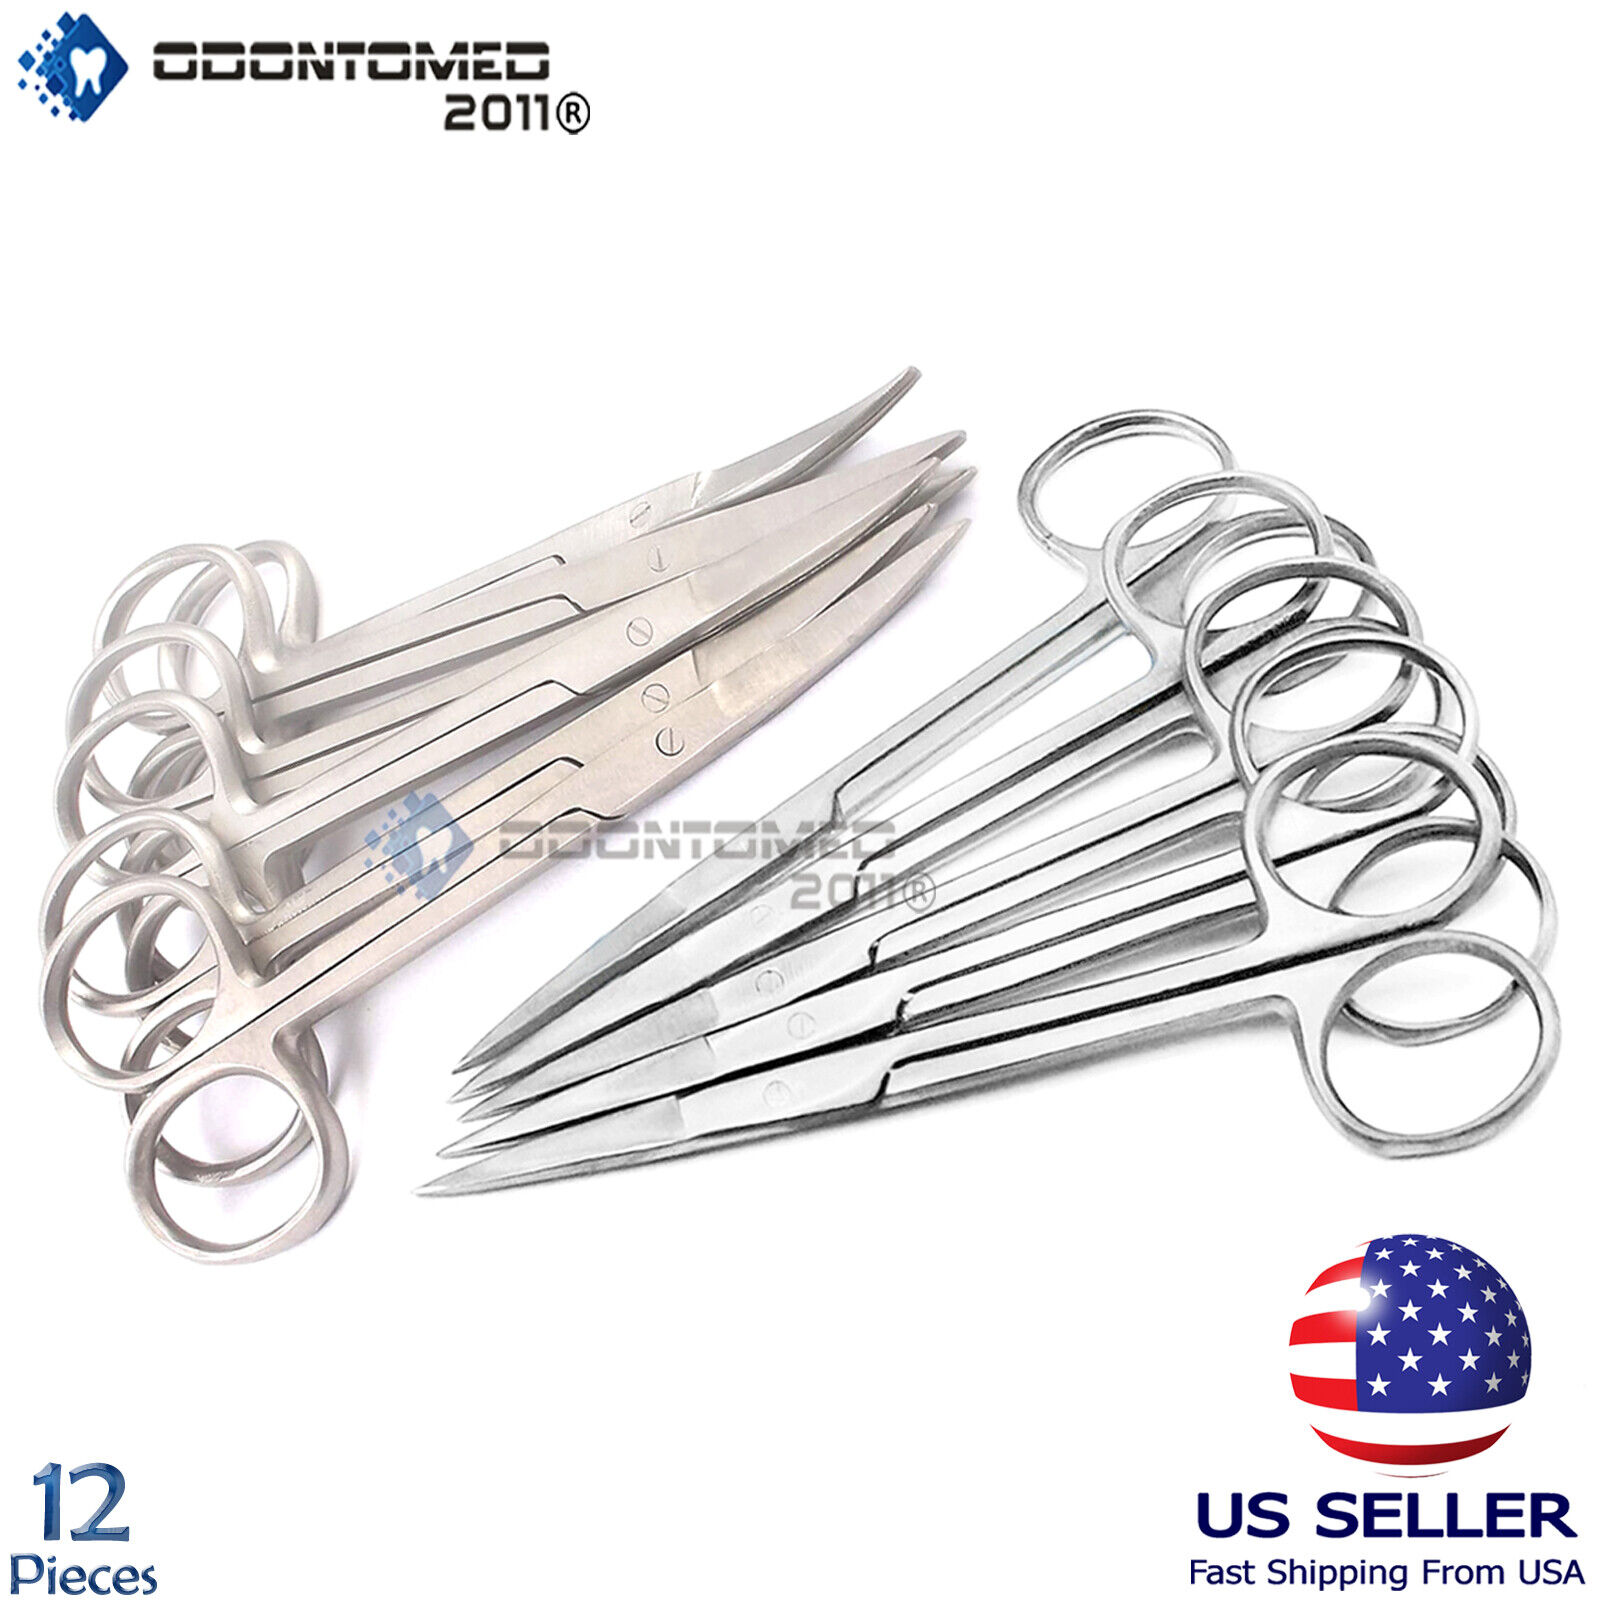 12 Iris Scissors 4.5" Curved & Straight Surgical Dental Instruments ODM Does Not Apply - фотография #3